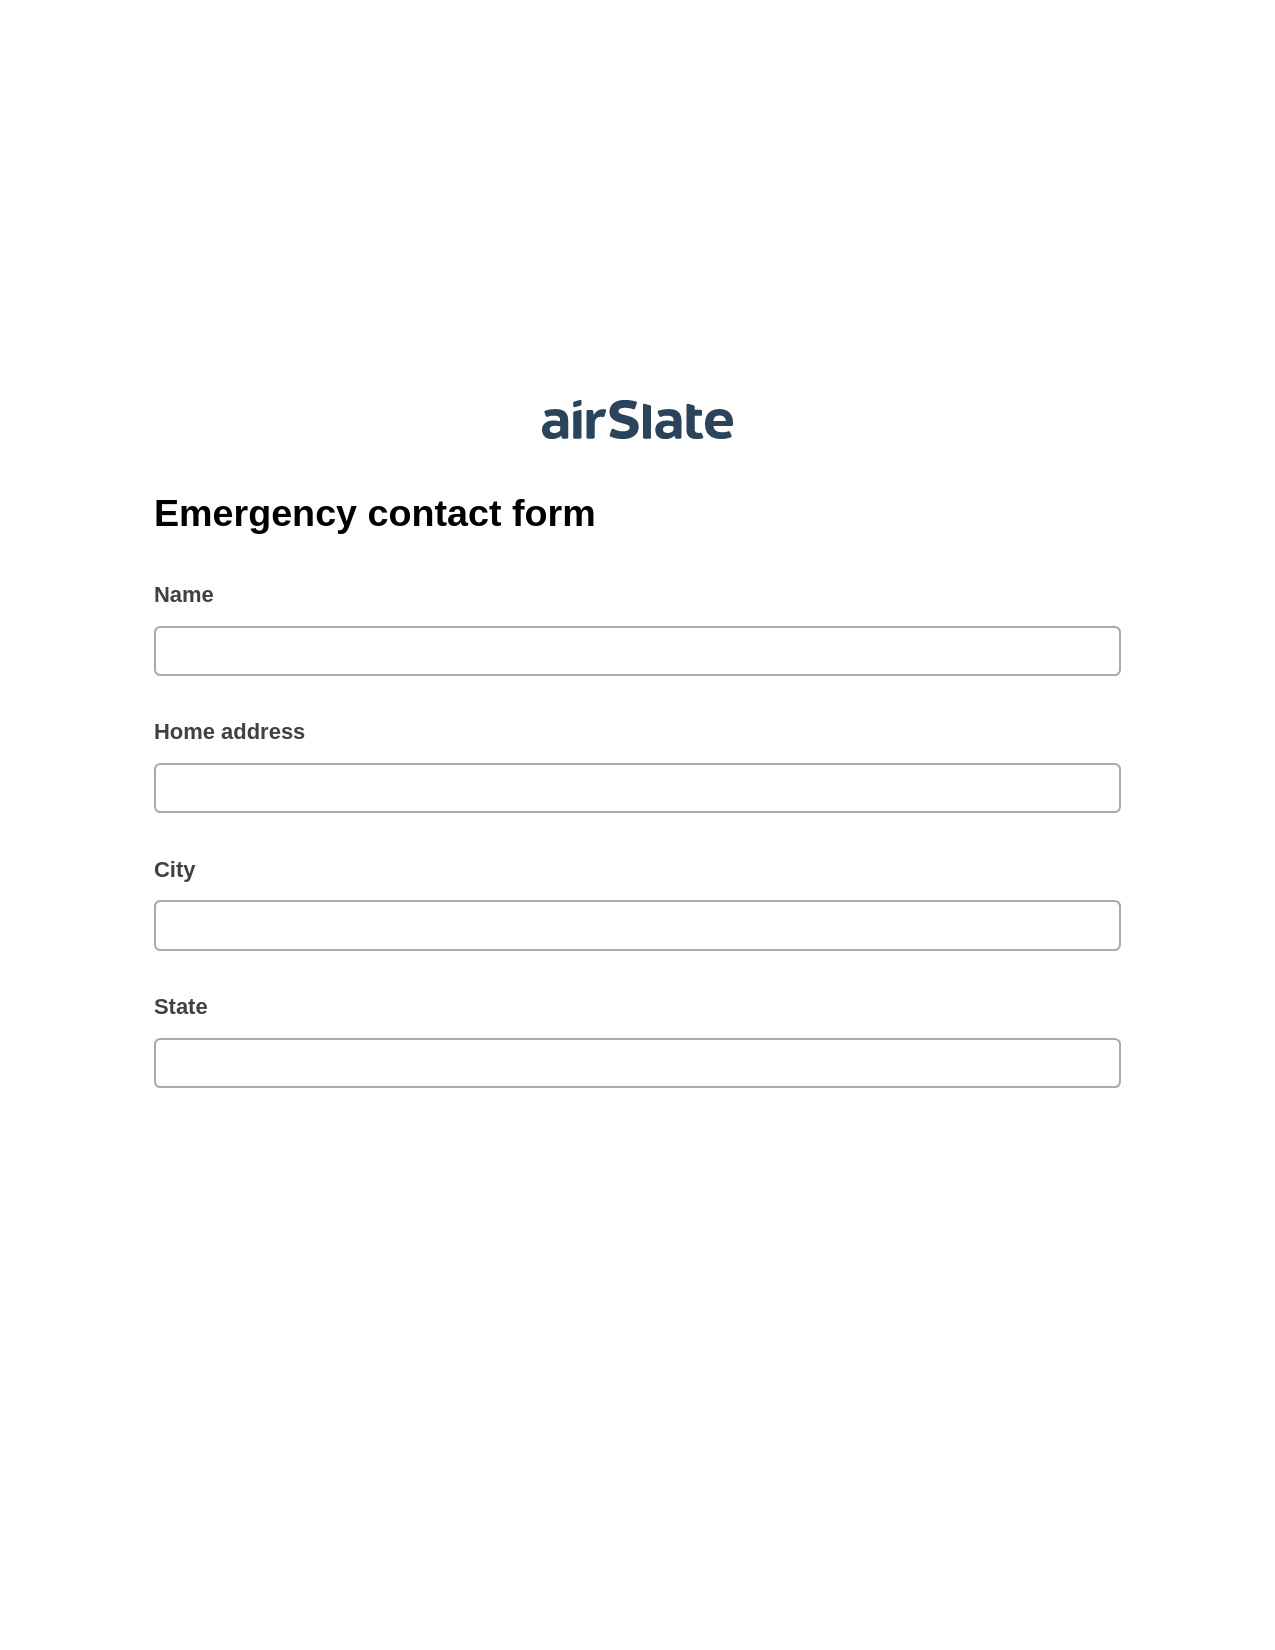 Multirole Emergency contact form Pre-fill from Google Sheet Dropdown Options Bot, Create MS Dynamics 365 Records Bot, Archive to SharePoint Folder Bot